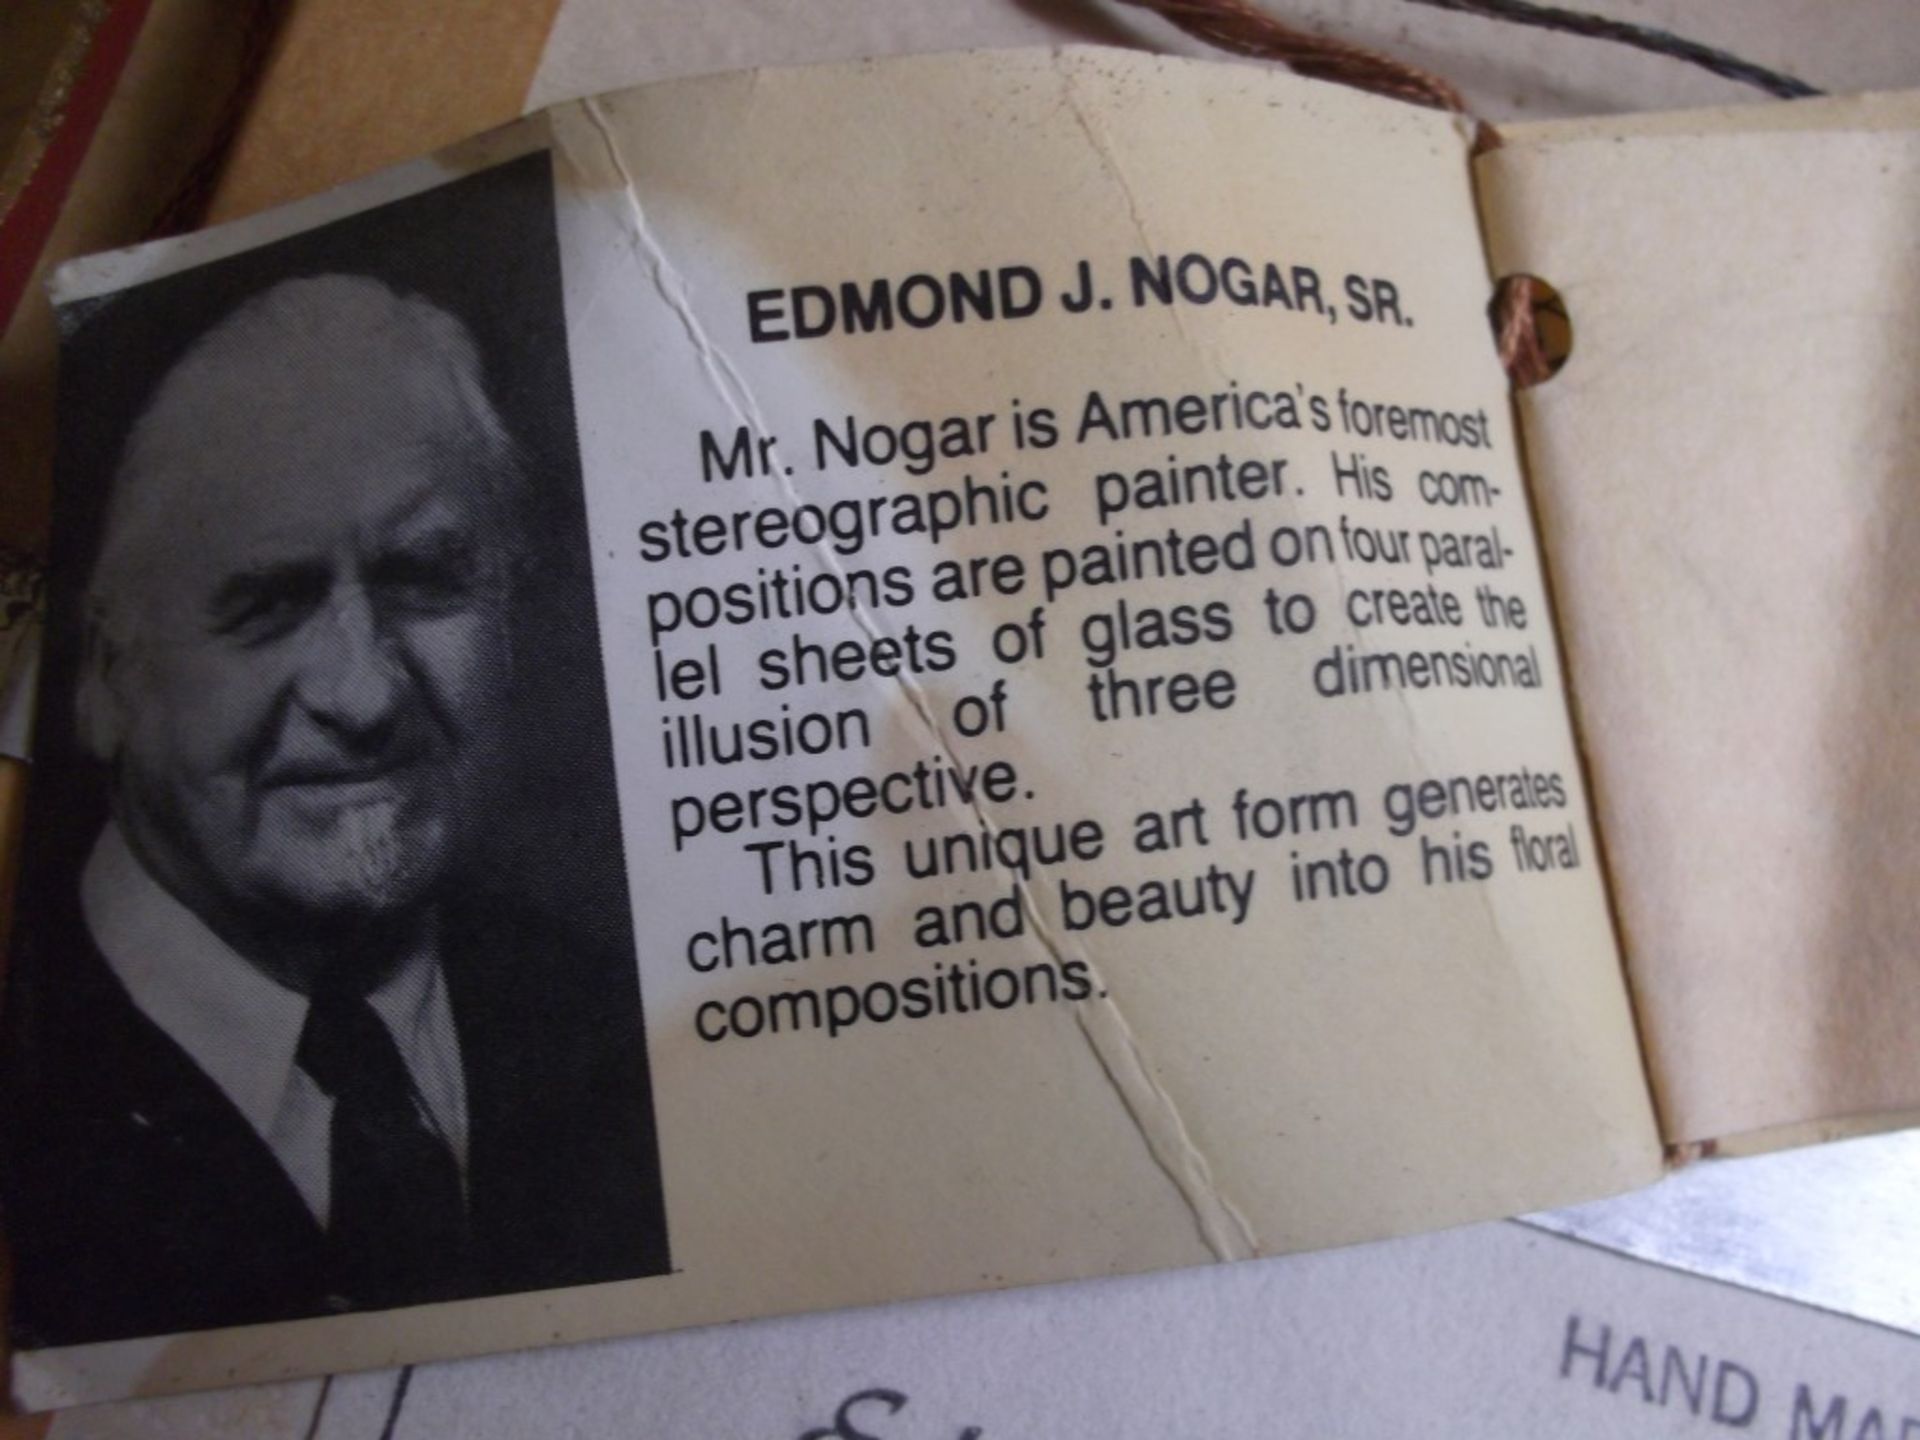 1 x Original Edmond J. Nogar Stereographic Oil Painting  - Hand Signed by Artist, With Certificate - - Image 5 of 7